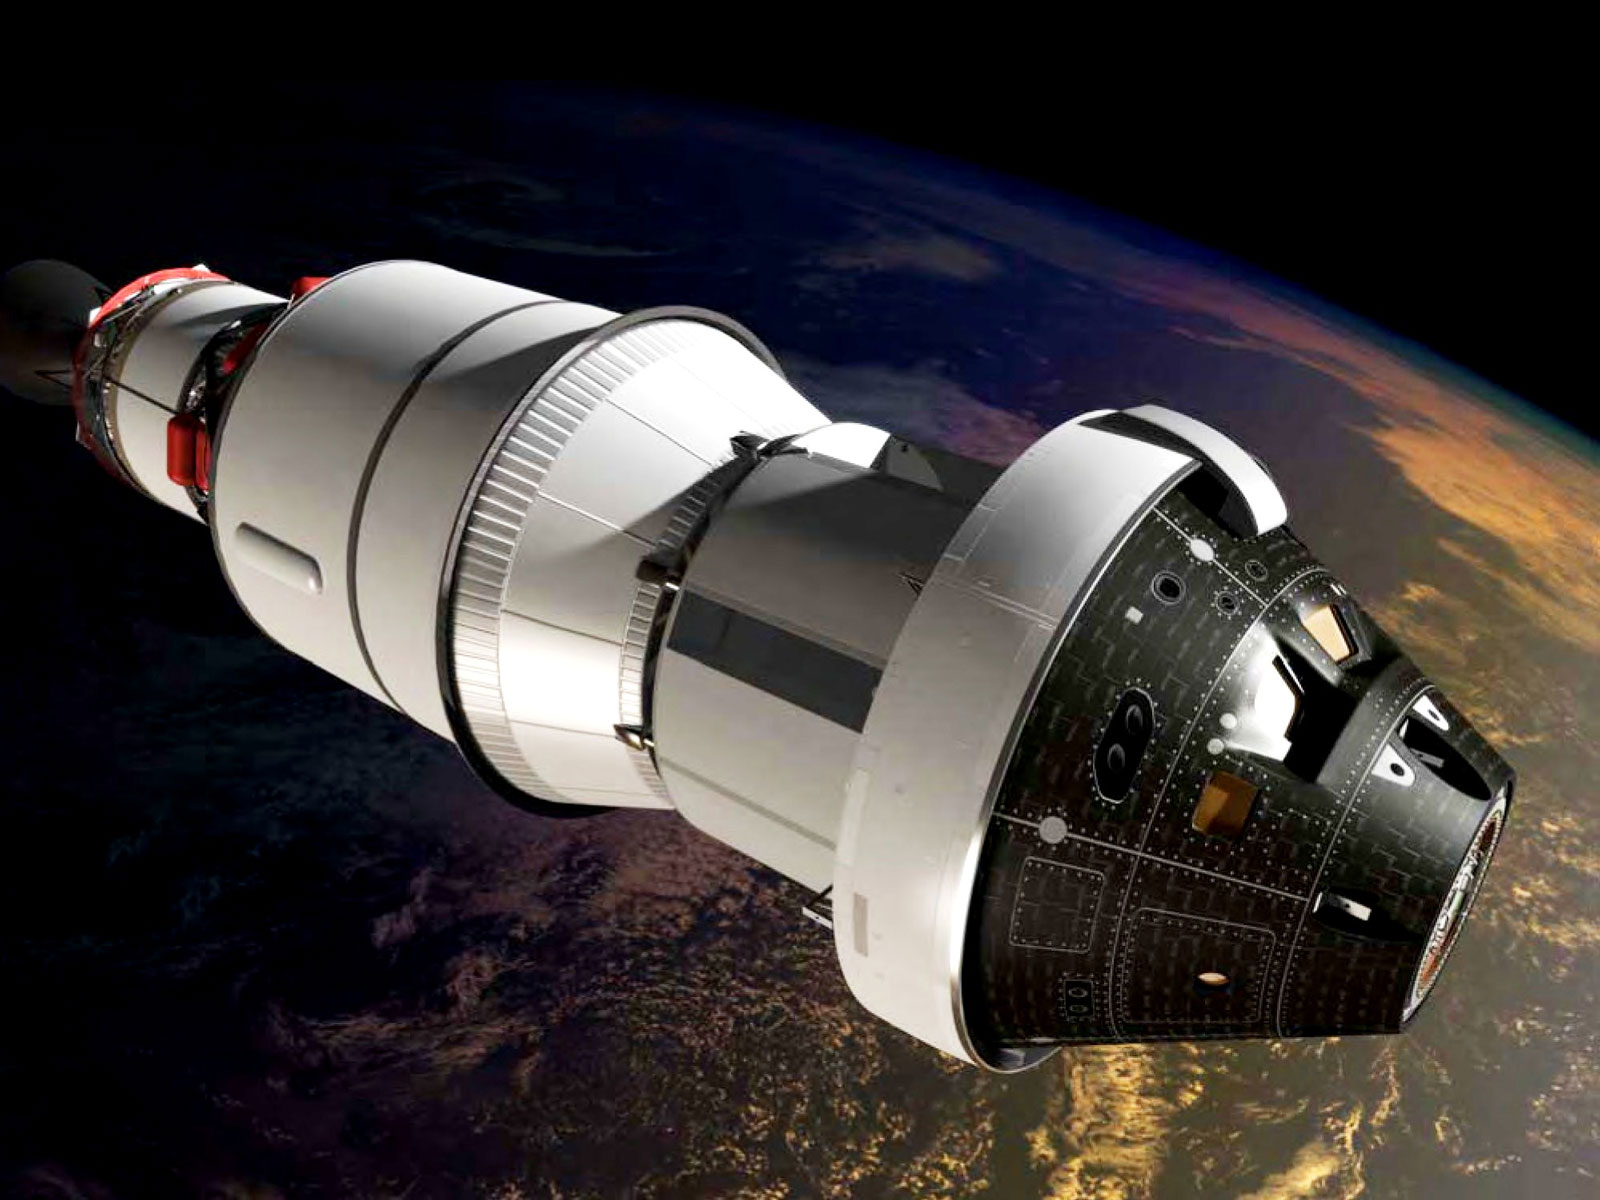 Learn More About Orion & Mars Launches